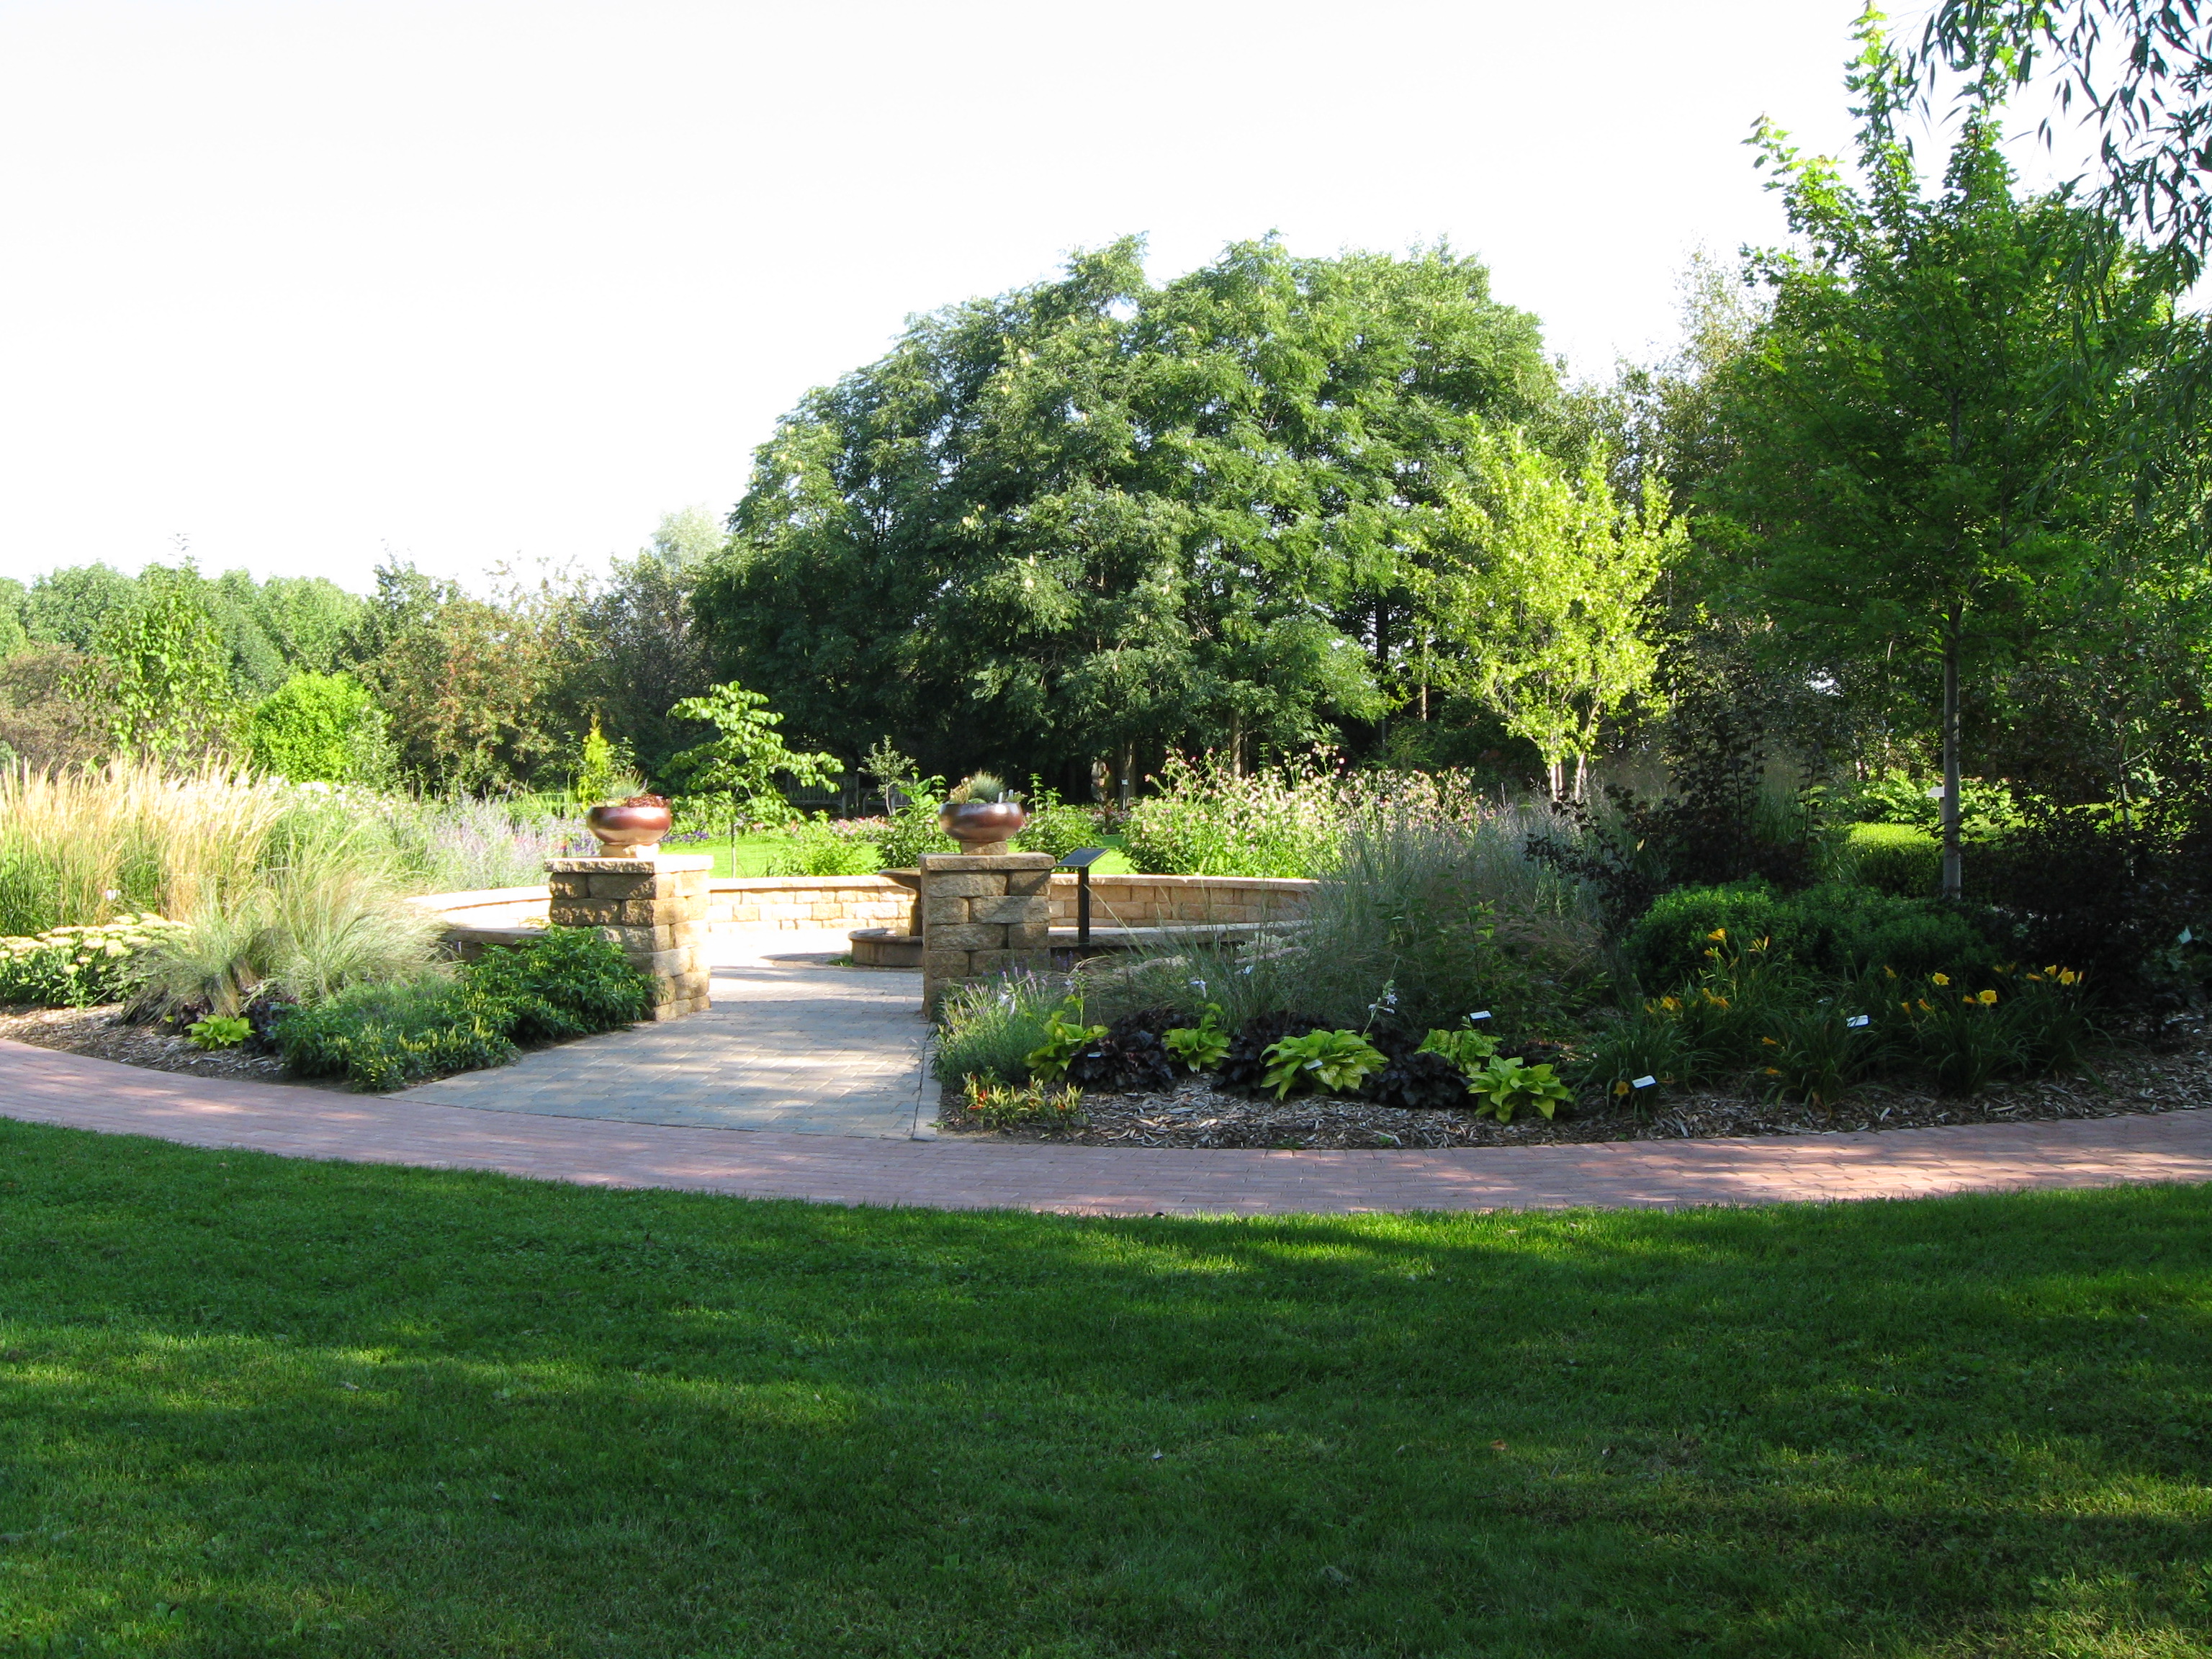 A lush, landscaped garden with a walkway and a variety of herbaceous plants.